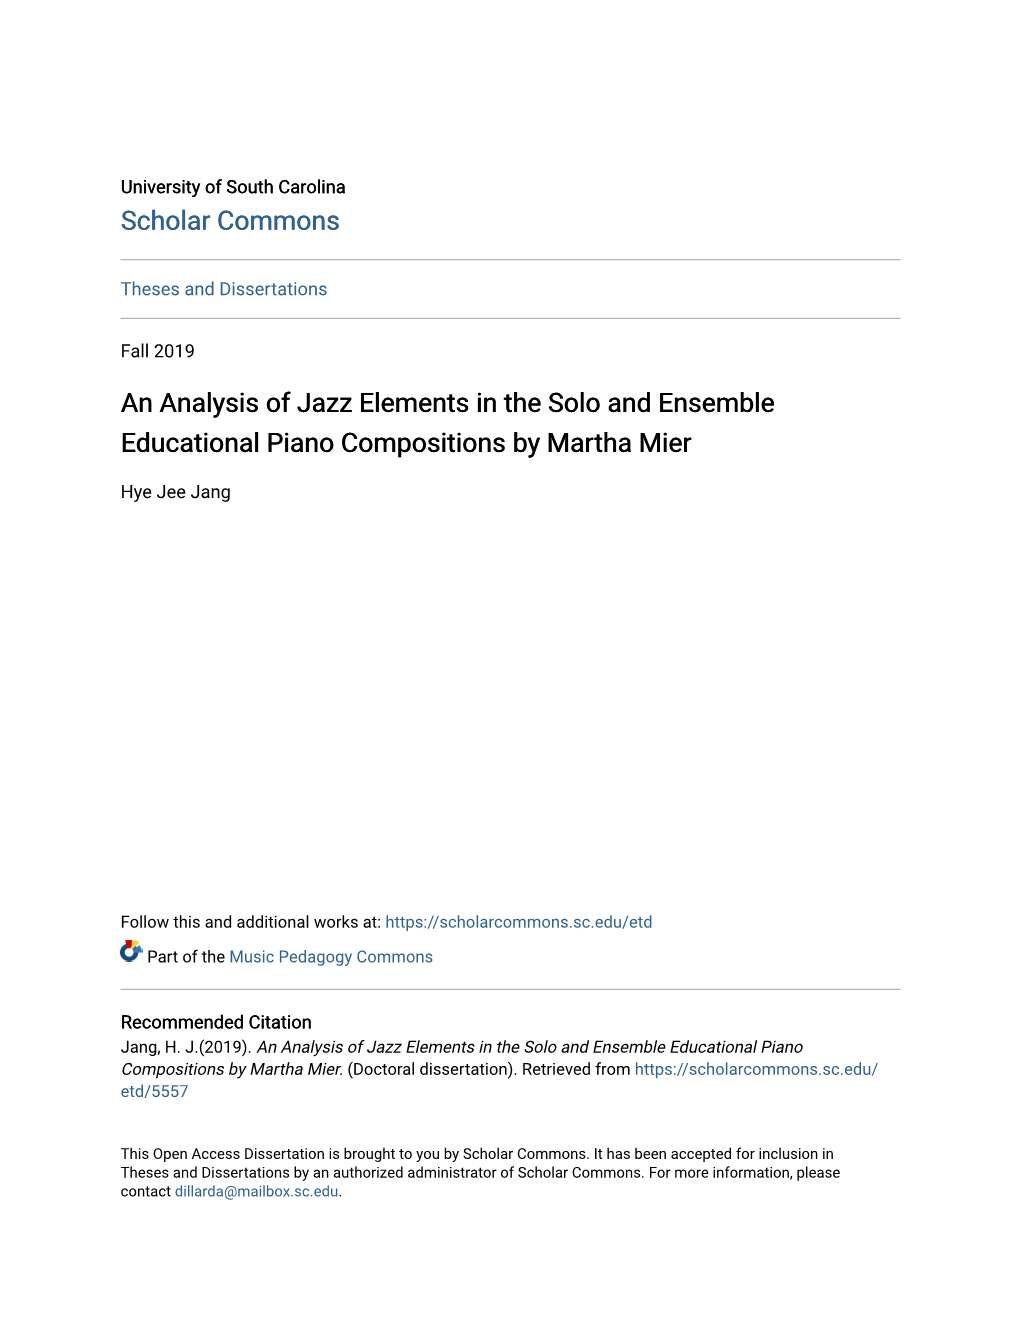 An Analysis of Jazz Elements in the Solo and Ensemble Educational Piano Compositions by Martha Mier